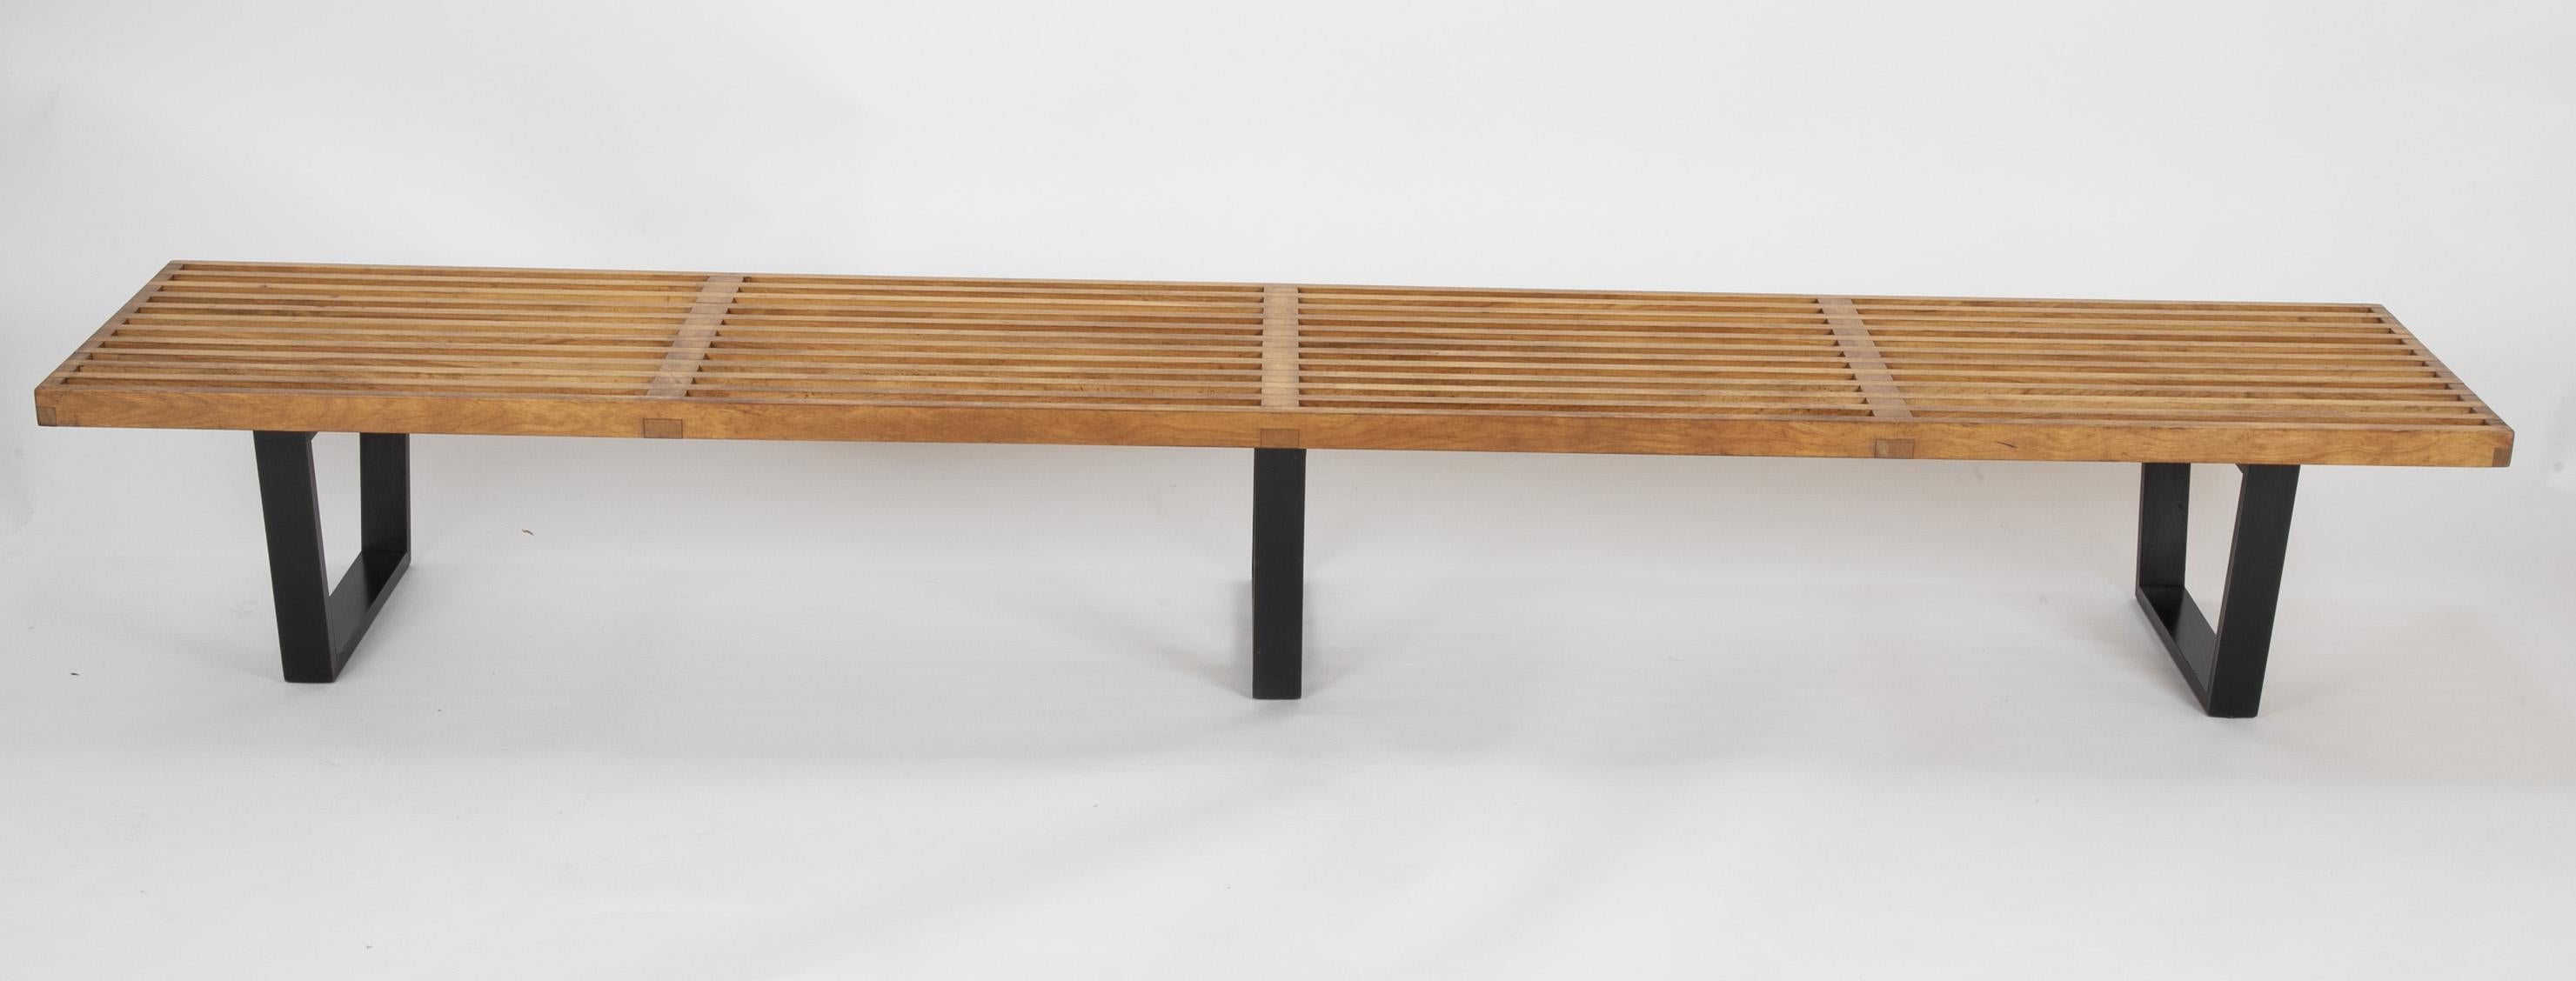 An original production design by George Nelson for Herman Miller, the slat bench with ebonized legs is both clean and timeless. This bench retains both its original patina and tin 